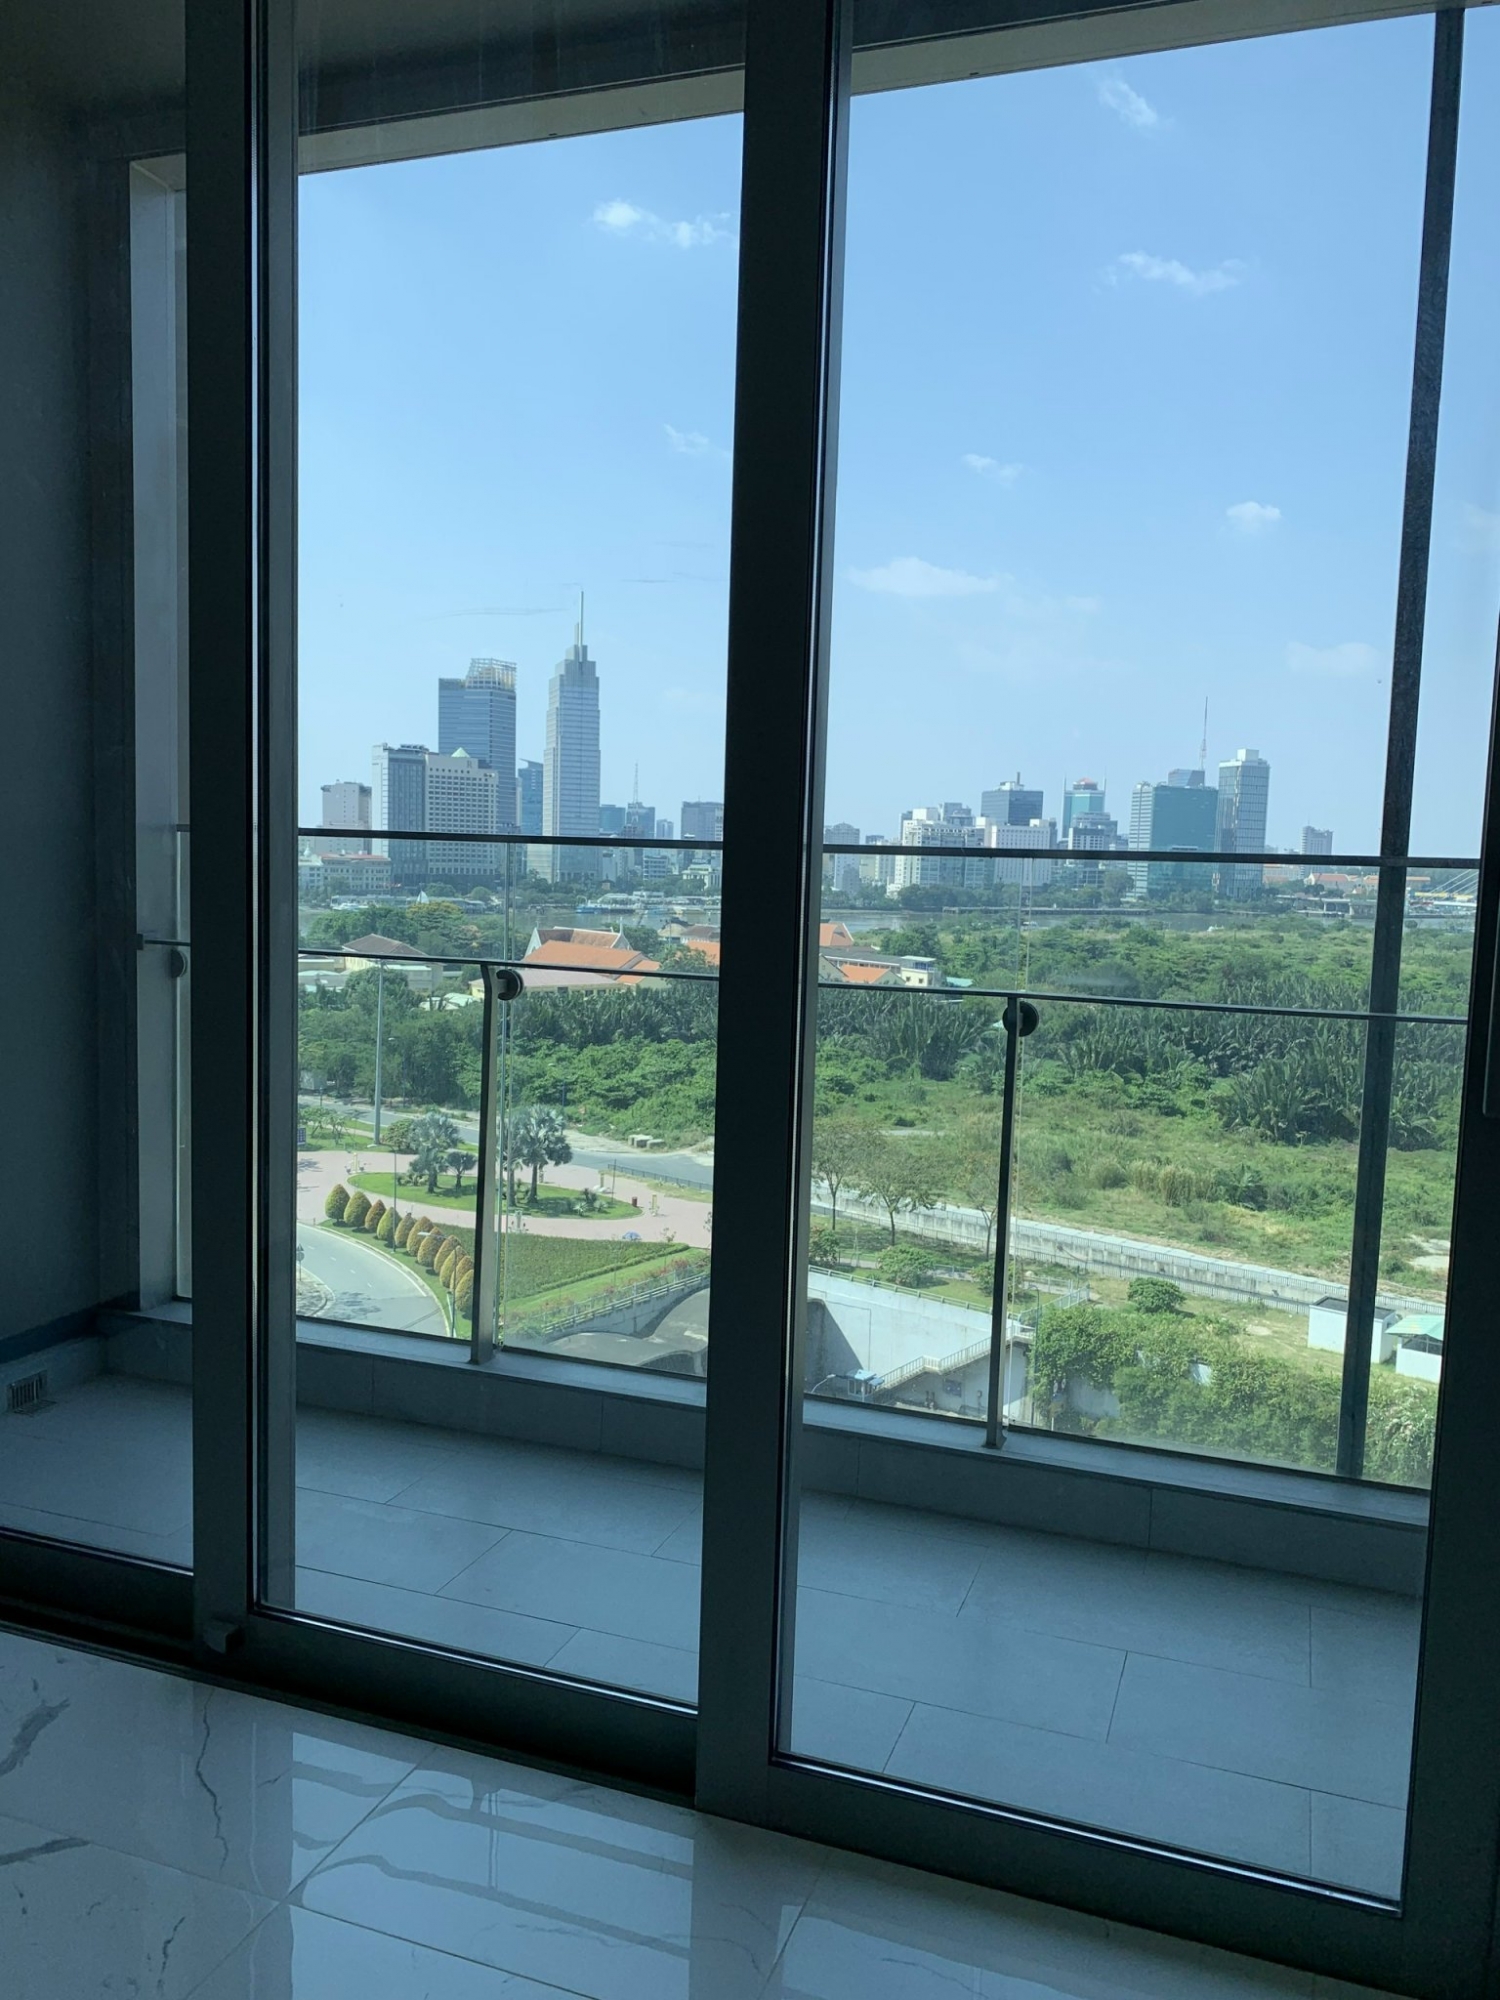 2 bedroom apartment for rent with Landmark 81 view in Linden - Empire City